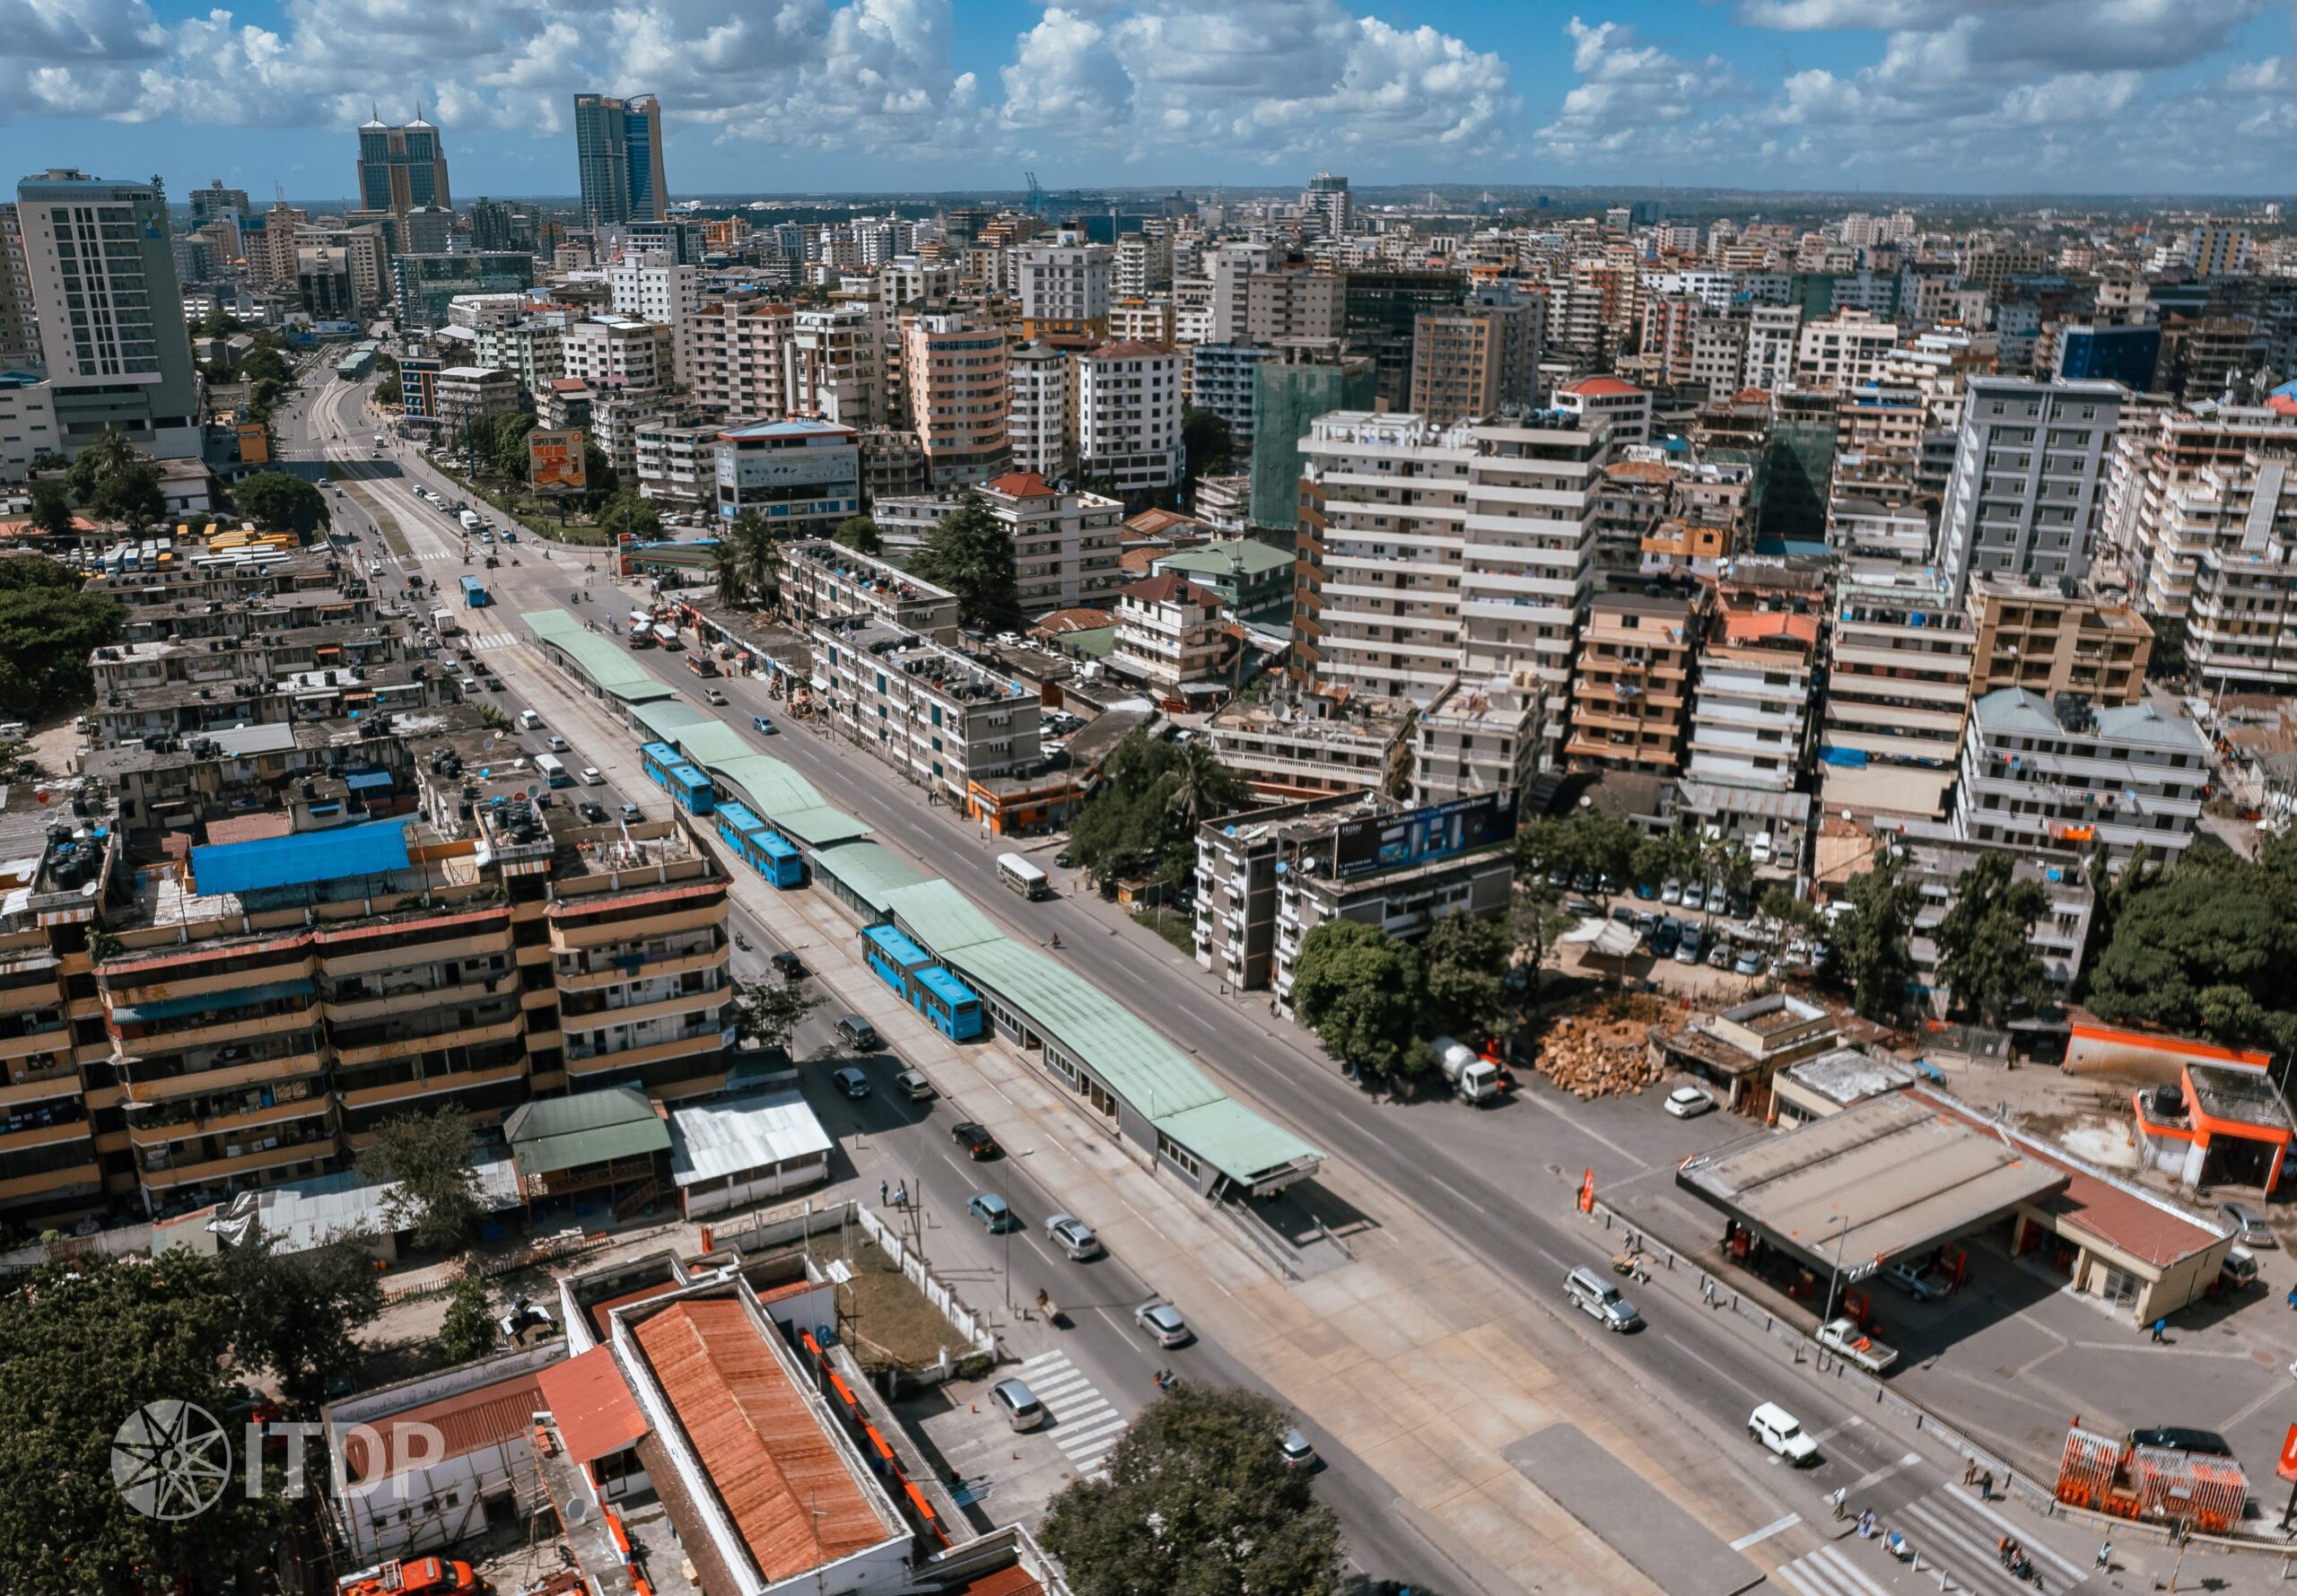 Fostering Sustainable, Accessible African Cities Through TOD